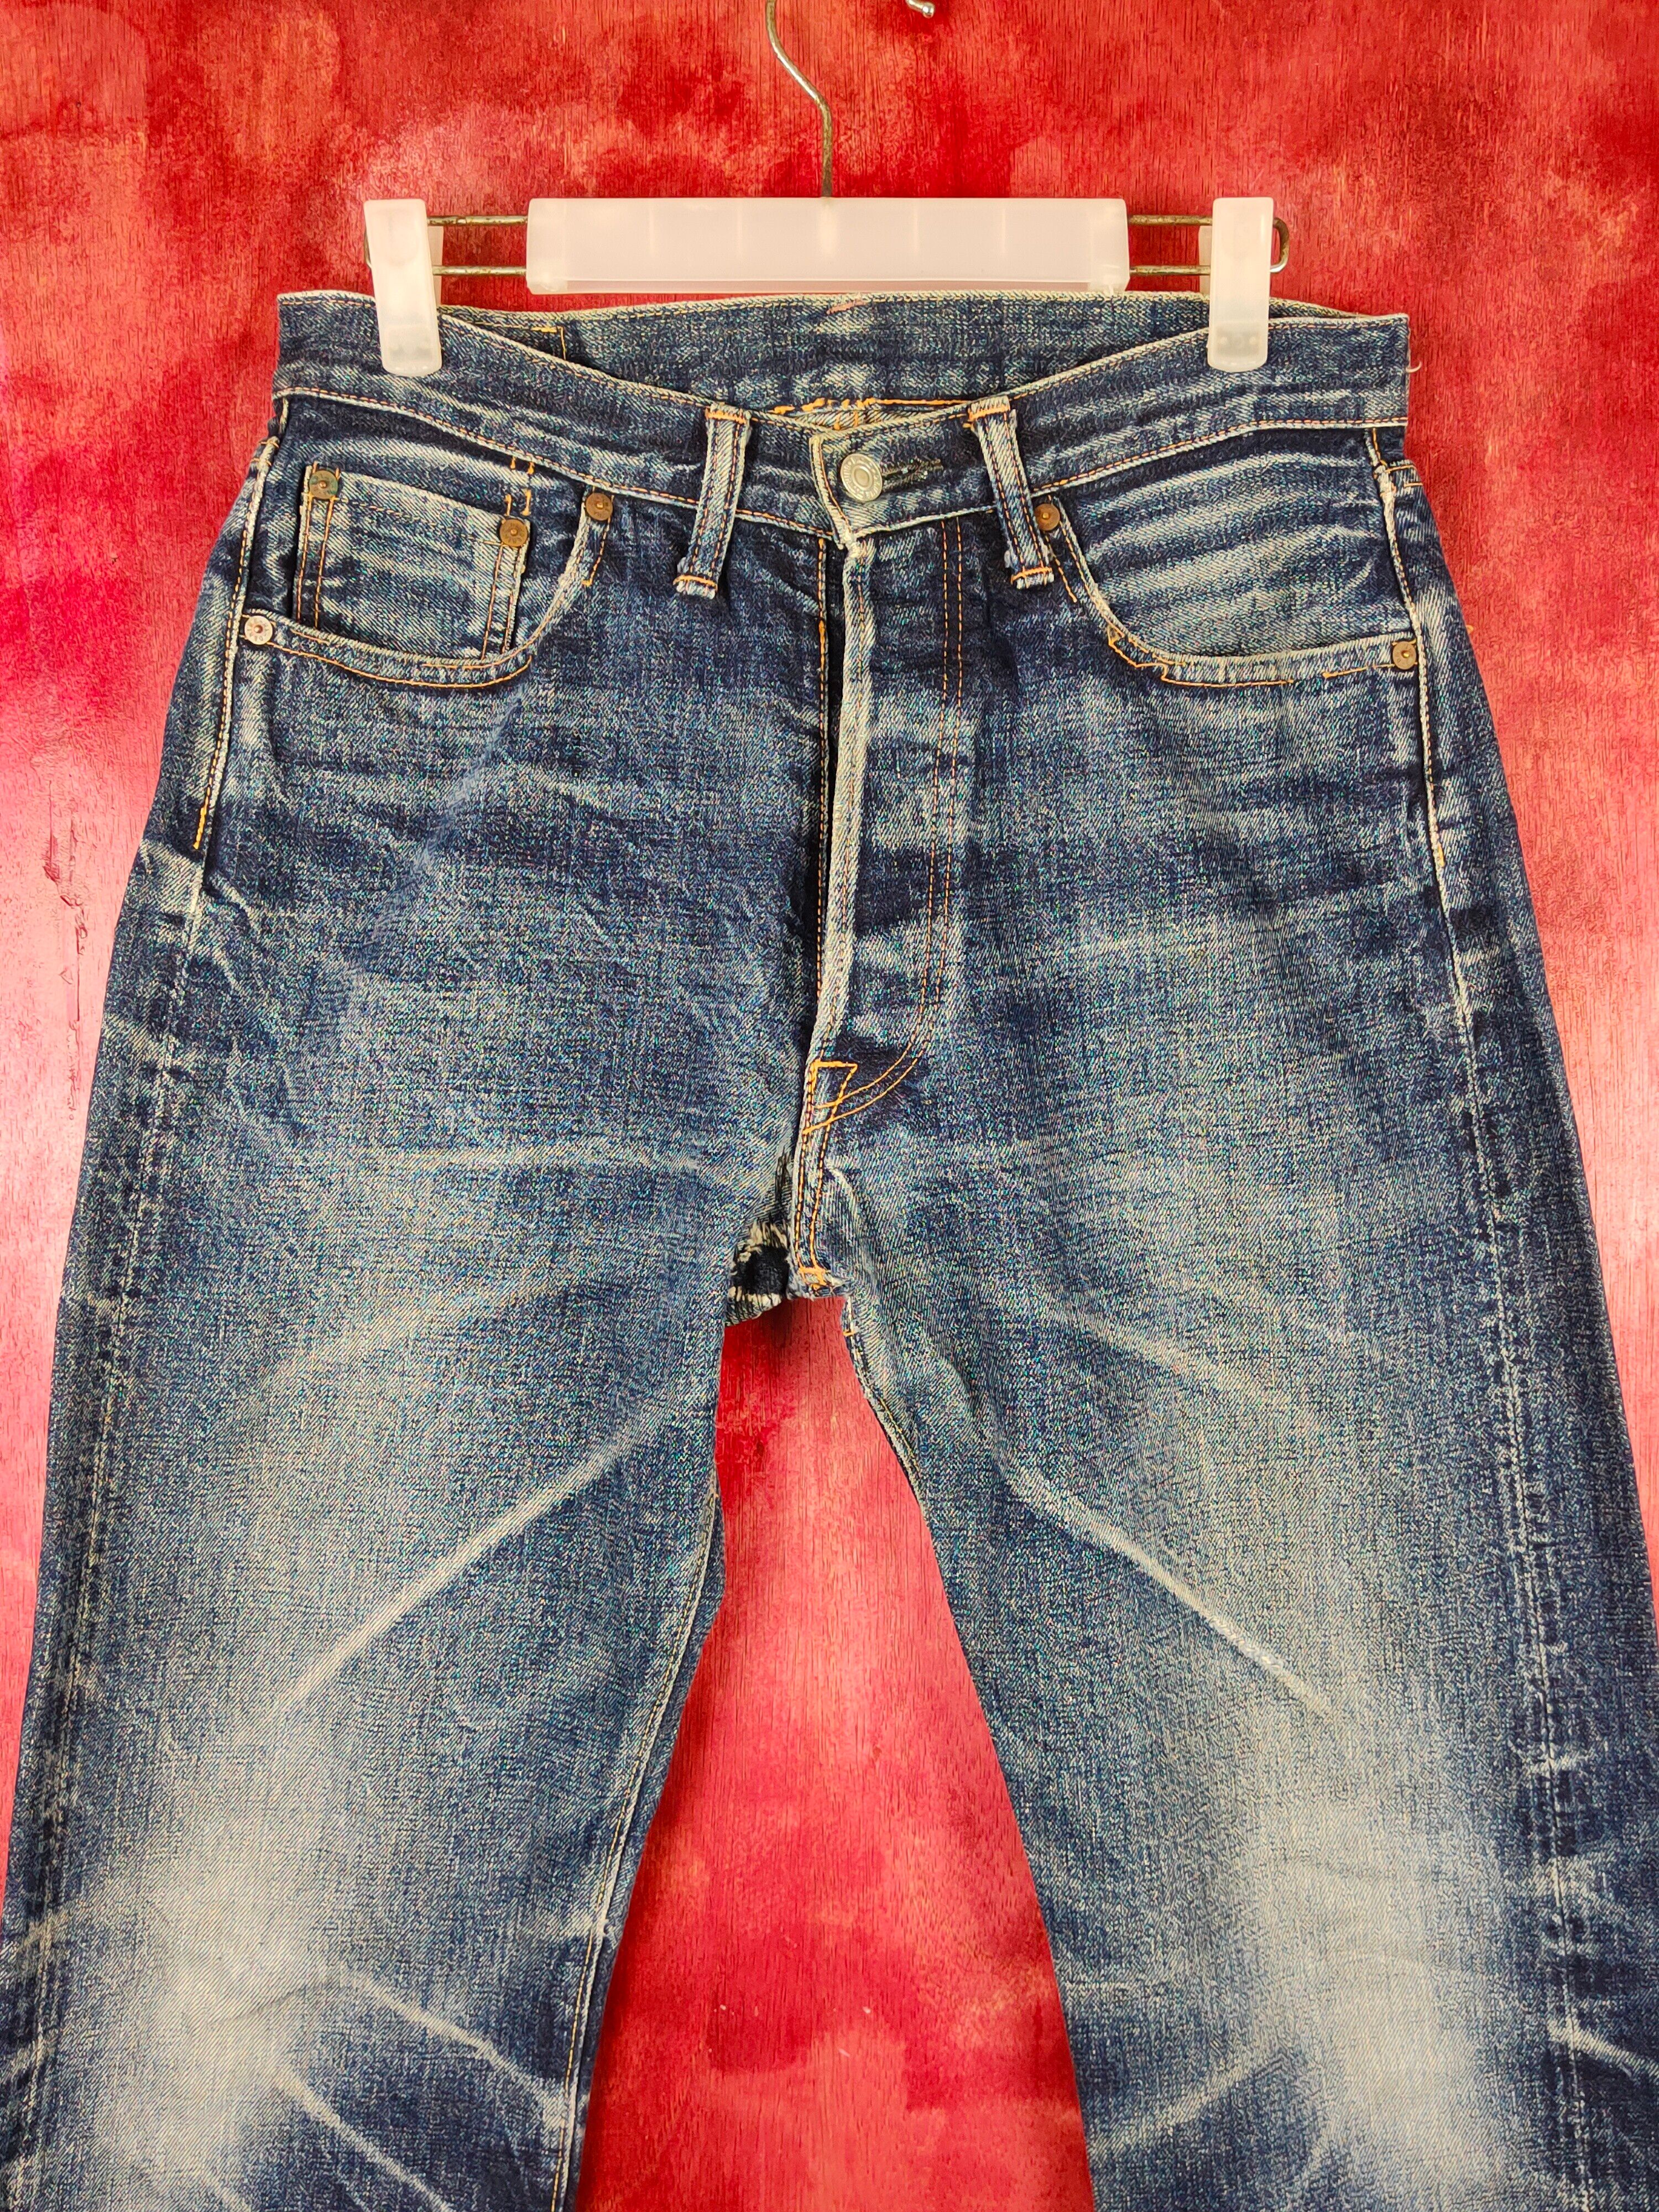 Vintage Denime Japan Vintage Distressed Ripped Jeans #S1705 Size US 31 - 2 Preview